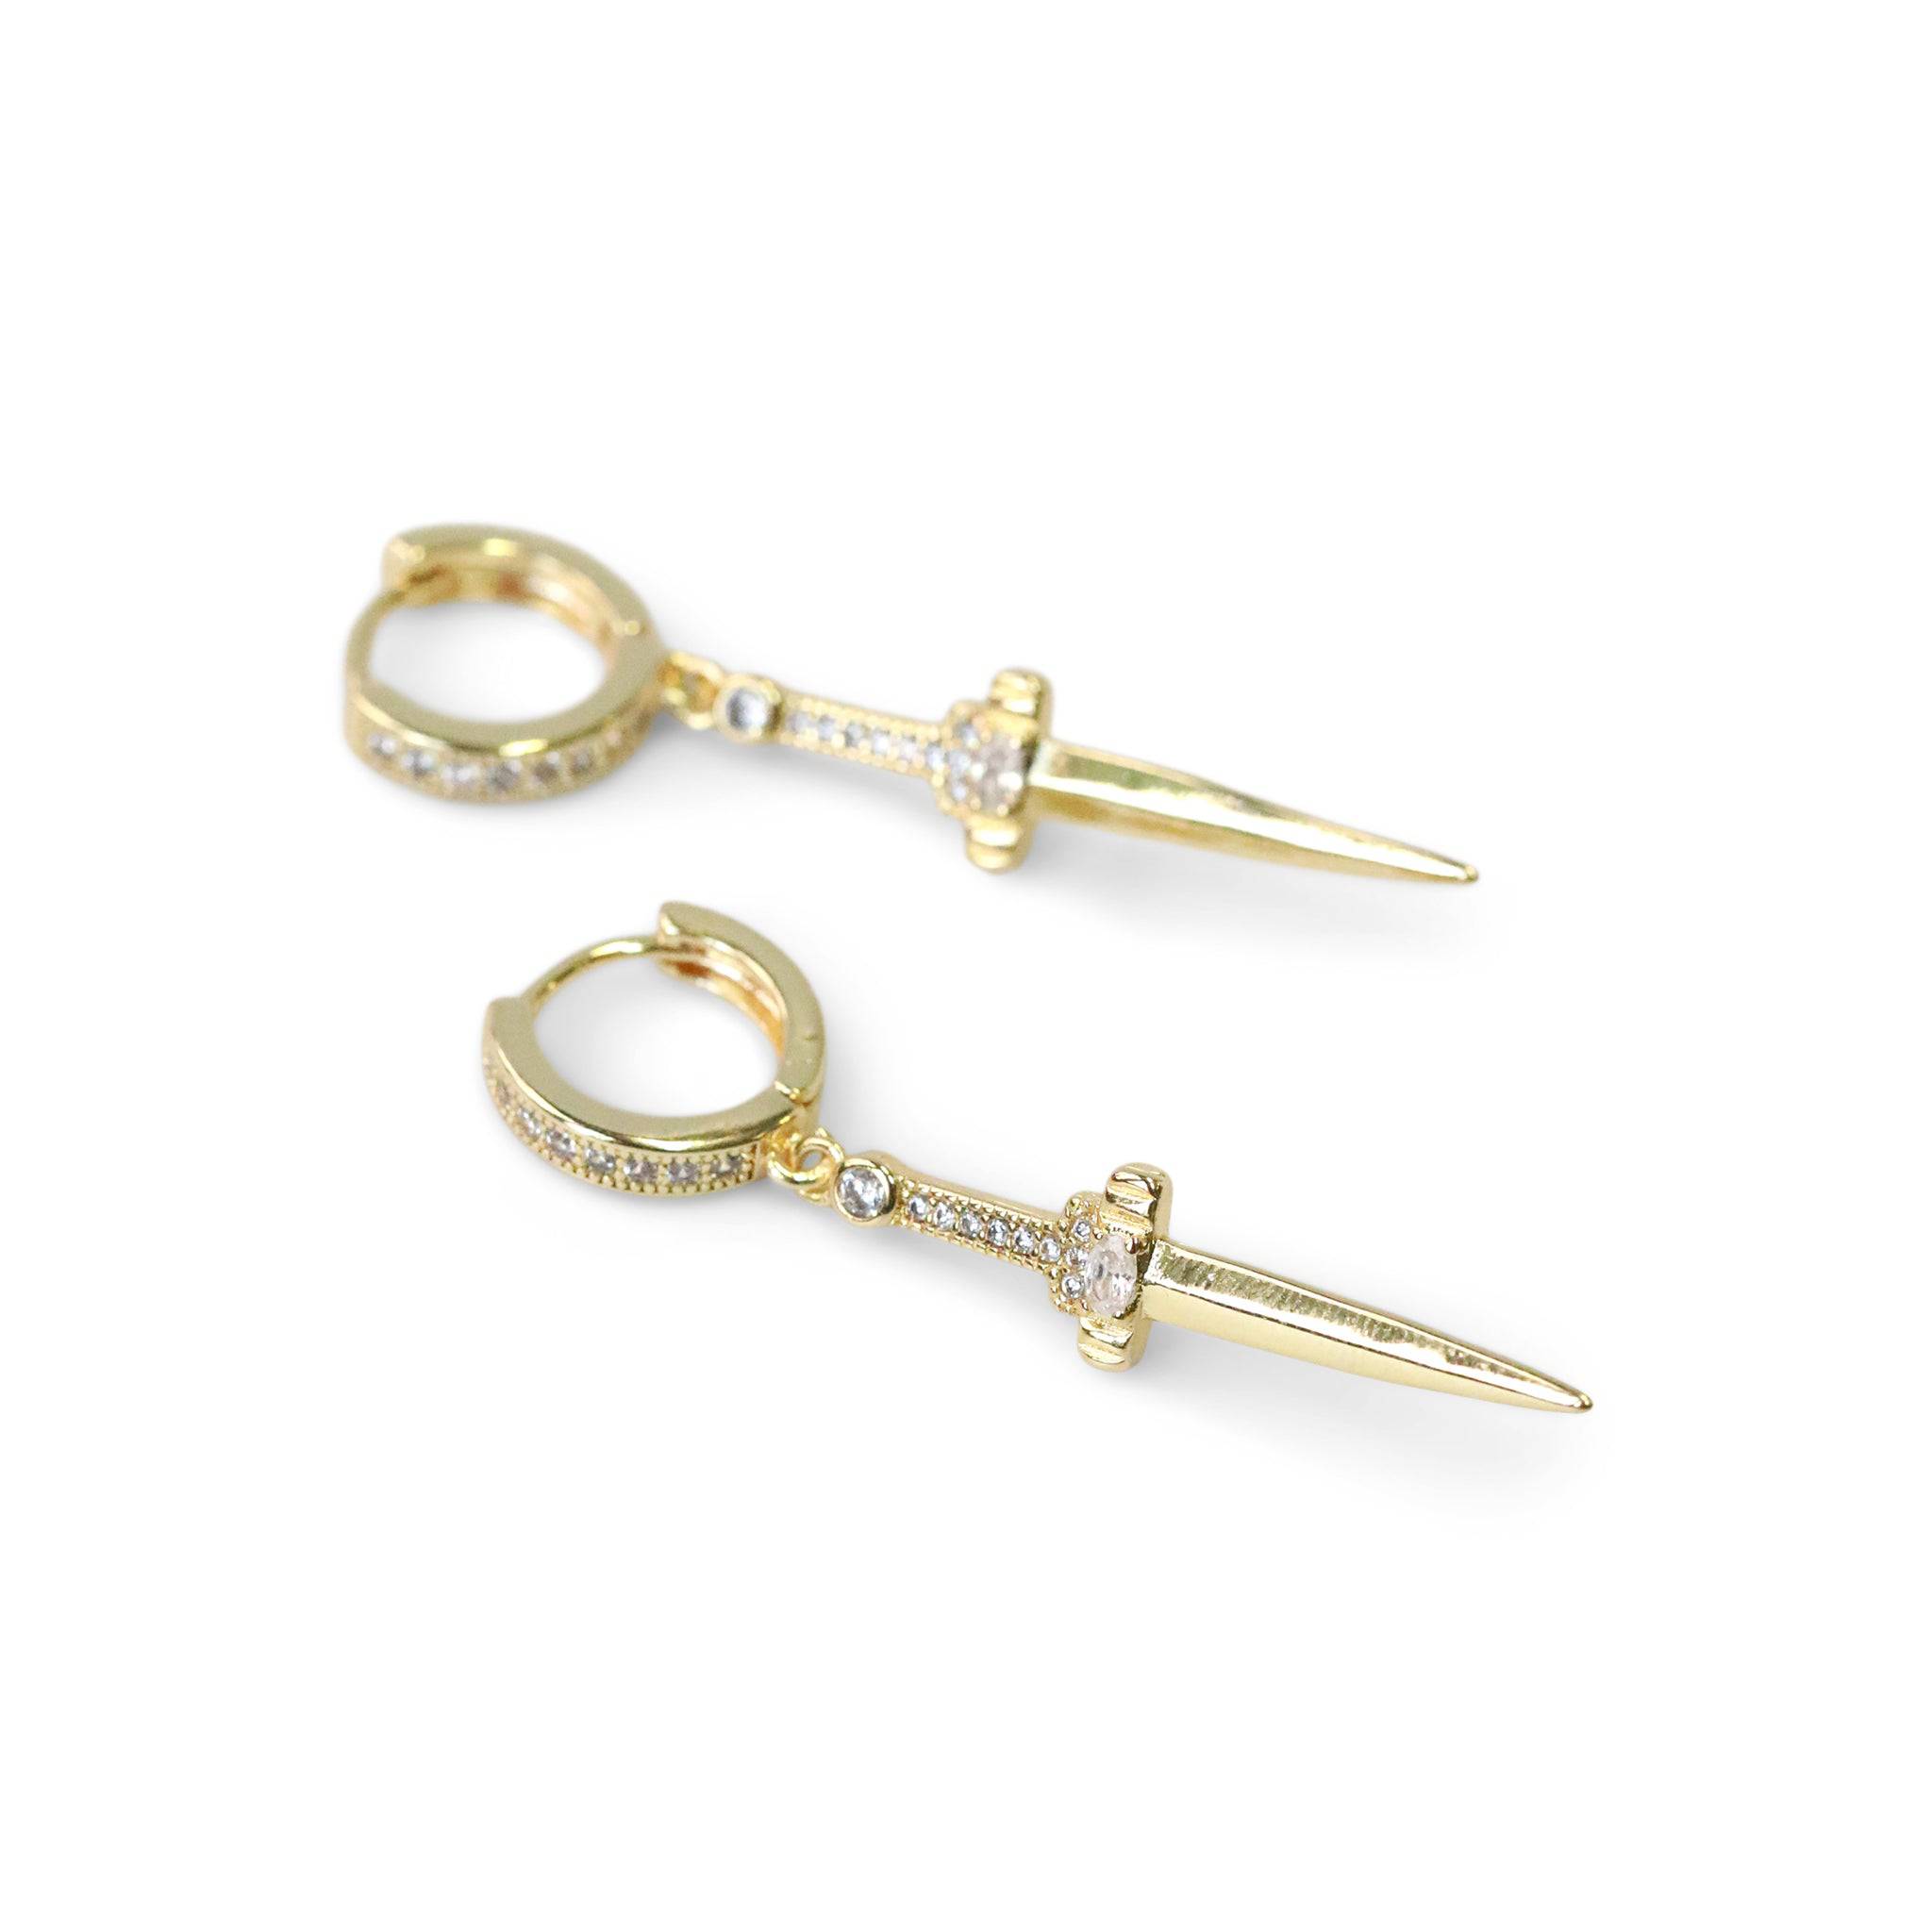 Athame Dagger Huggie Earrings - The Gilded Witch